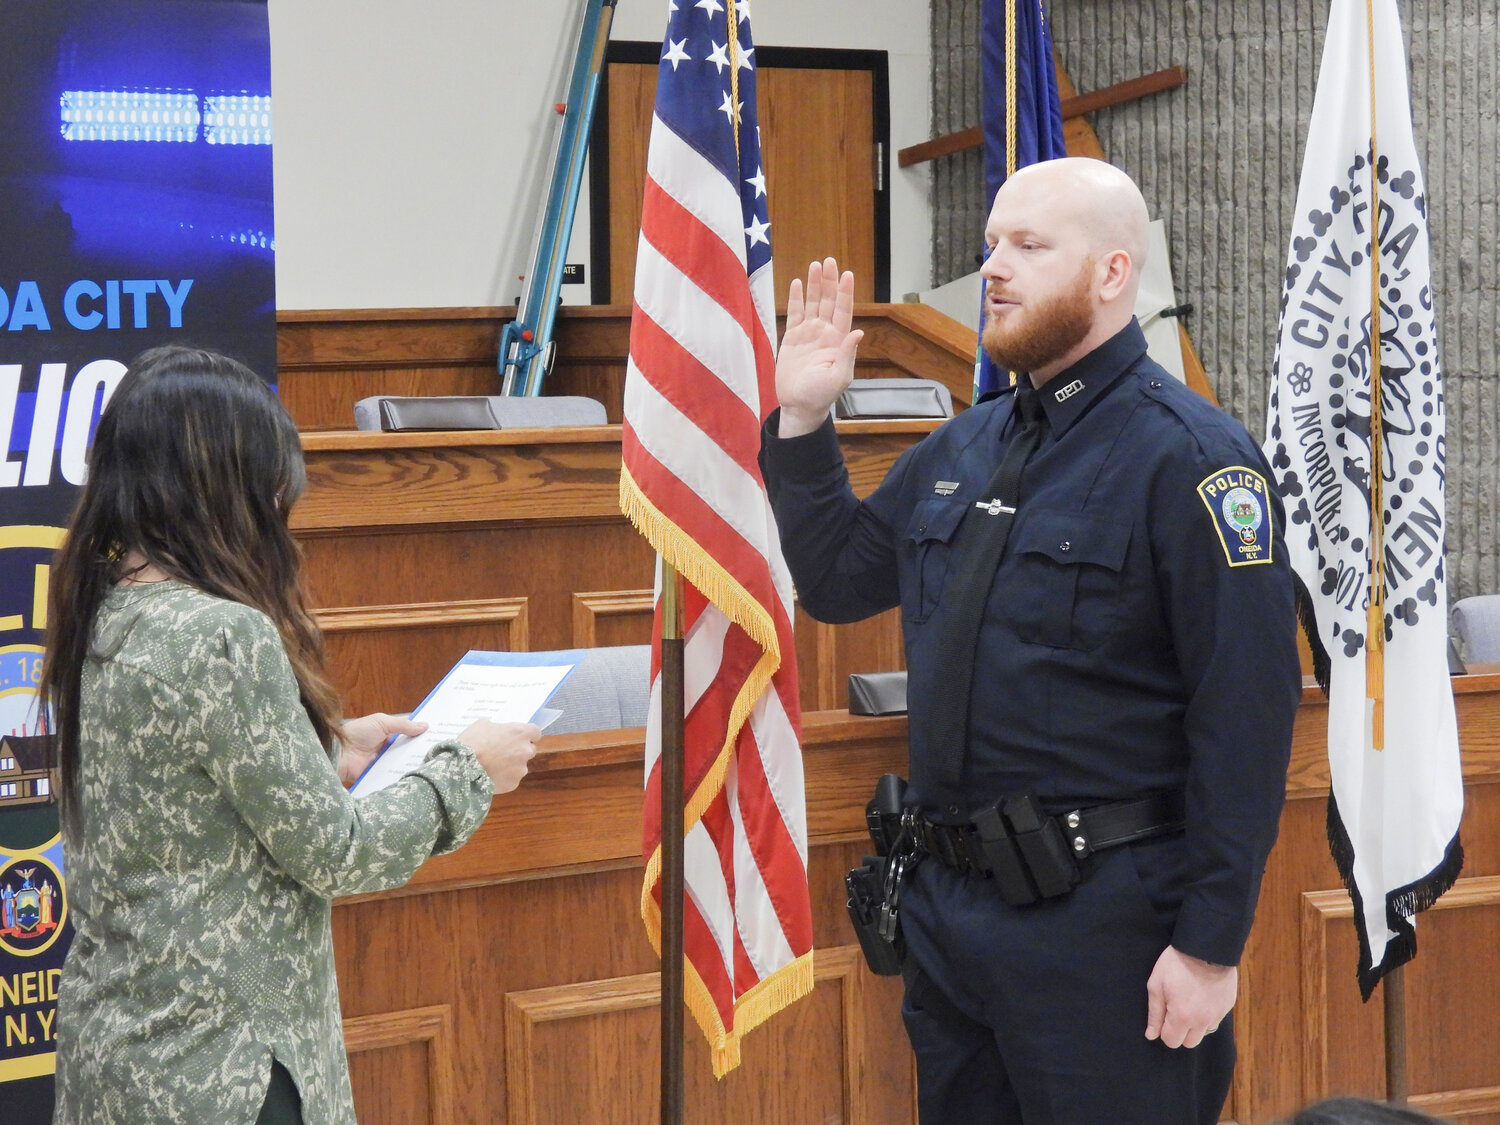 Officer Zachary Przybyla takes takes his oath at a swearing-in ceremony in the Oneida Common Council on Thursday, March 9. Przybyla served in the United States Marine Corp as an infantry rifleman for the 1st Battalion 1st Marine Regiment and later the 3rd Light Armored Reconnaissance Battalion. He transferred from the Oneida County Sheriff's Office